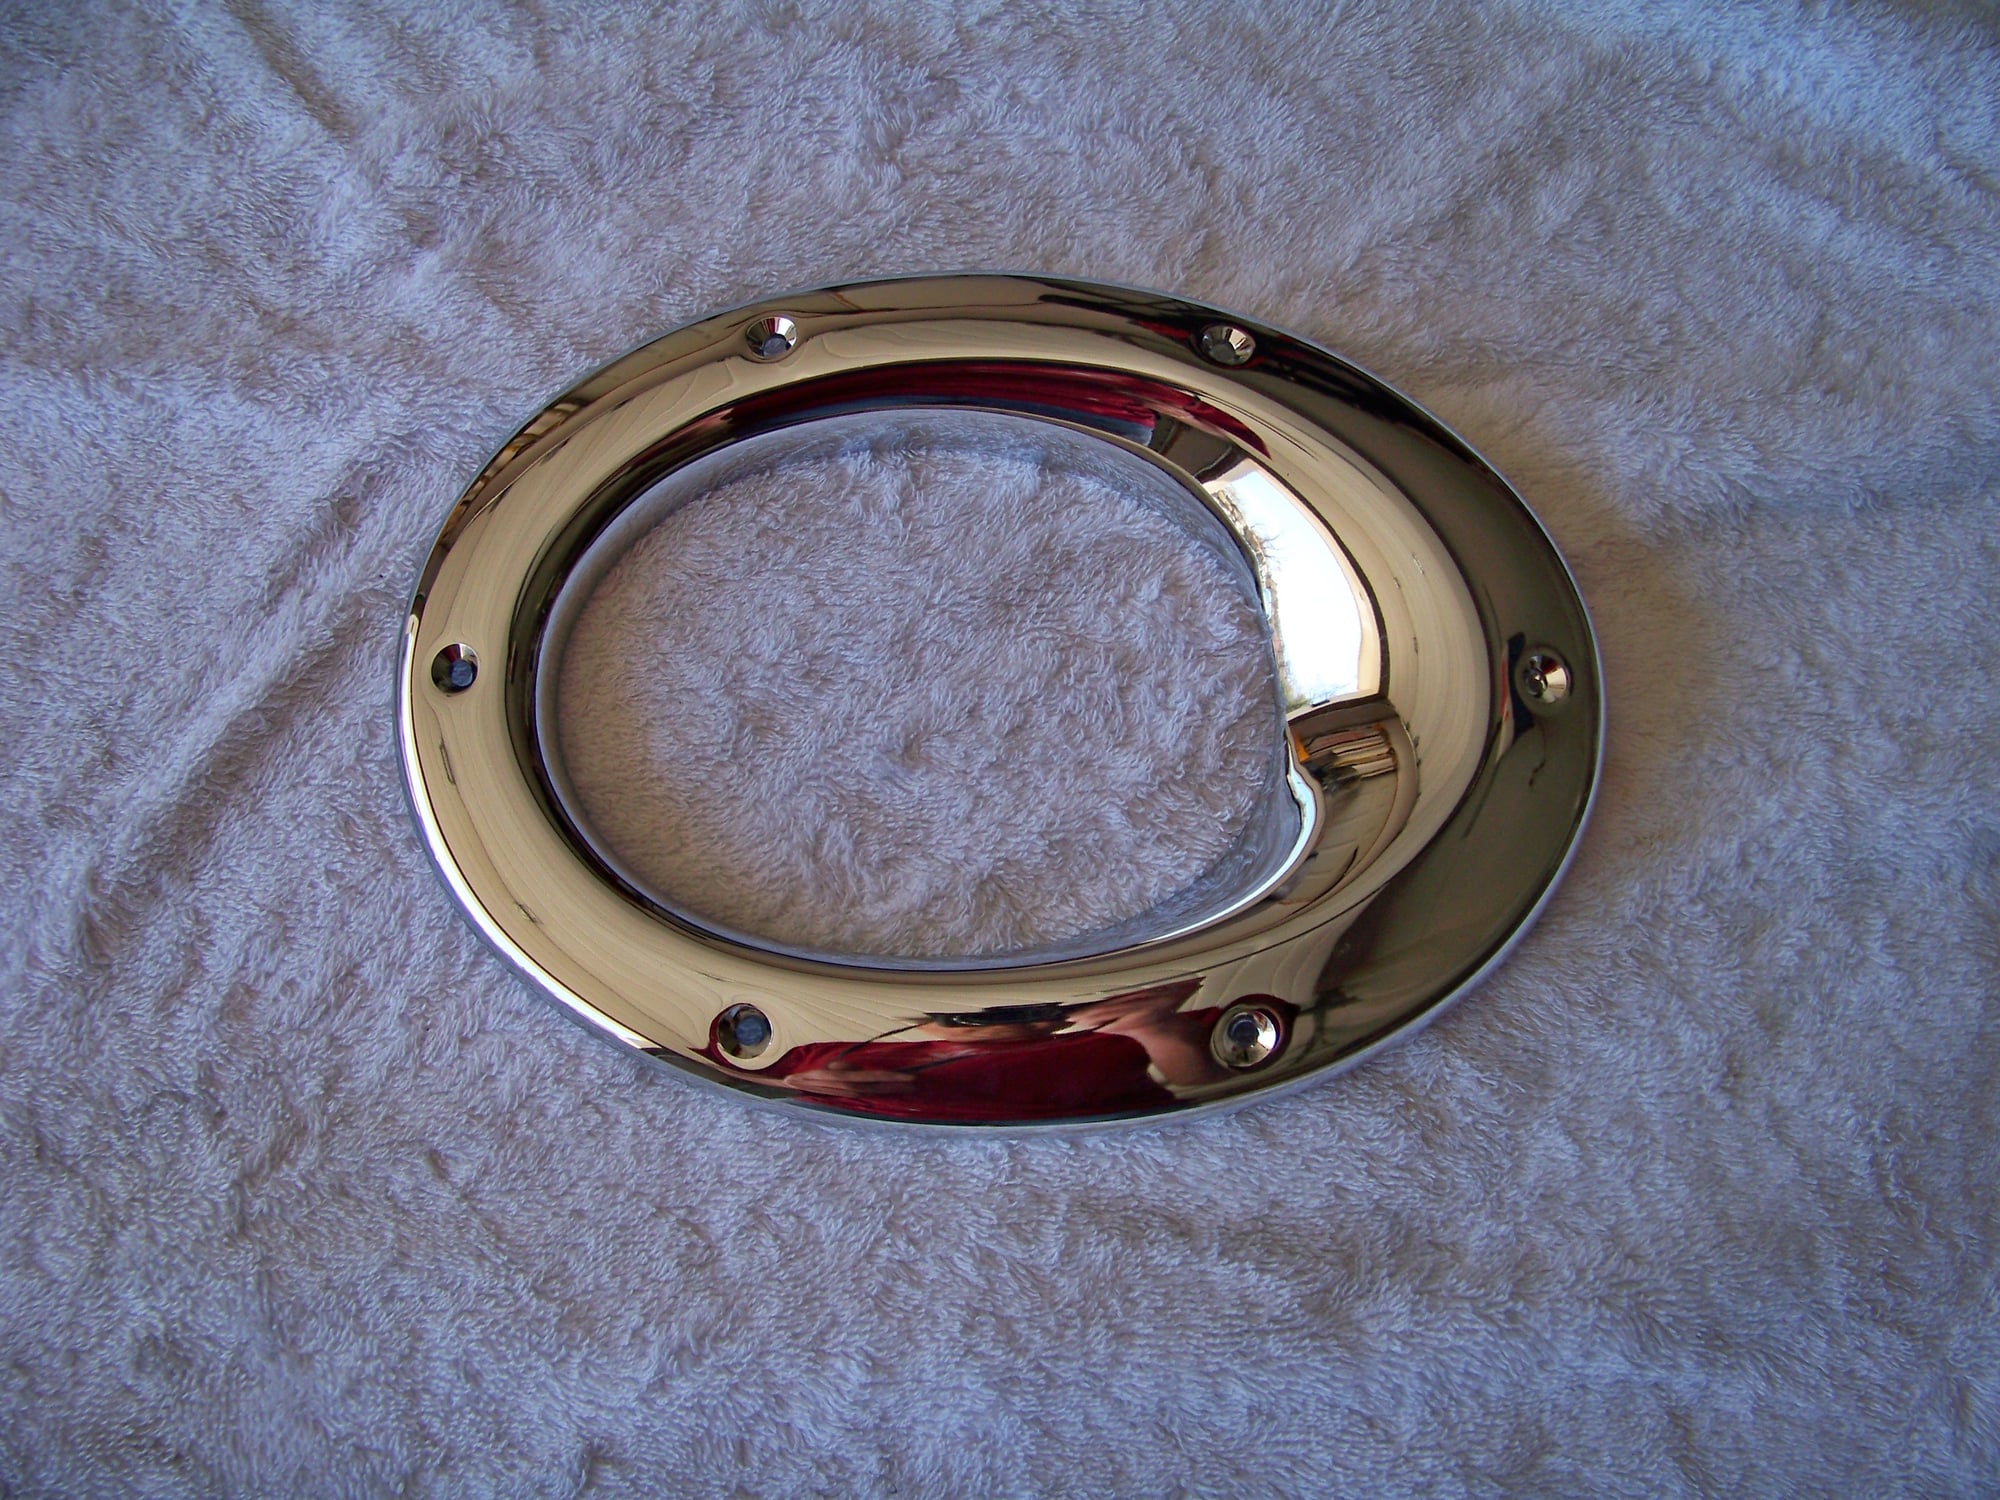 Exterior Body Parts - Arden XK8 XKR 2001 on front fog lamp surrounds - New - 2001 to 2006 Jaguar XK8 - Boston, MA 02110, United States